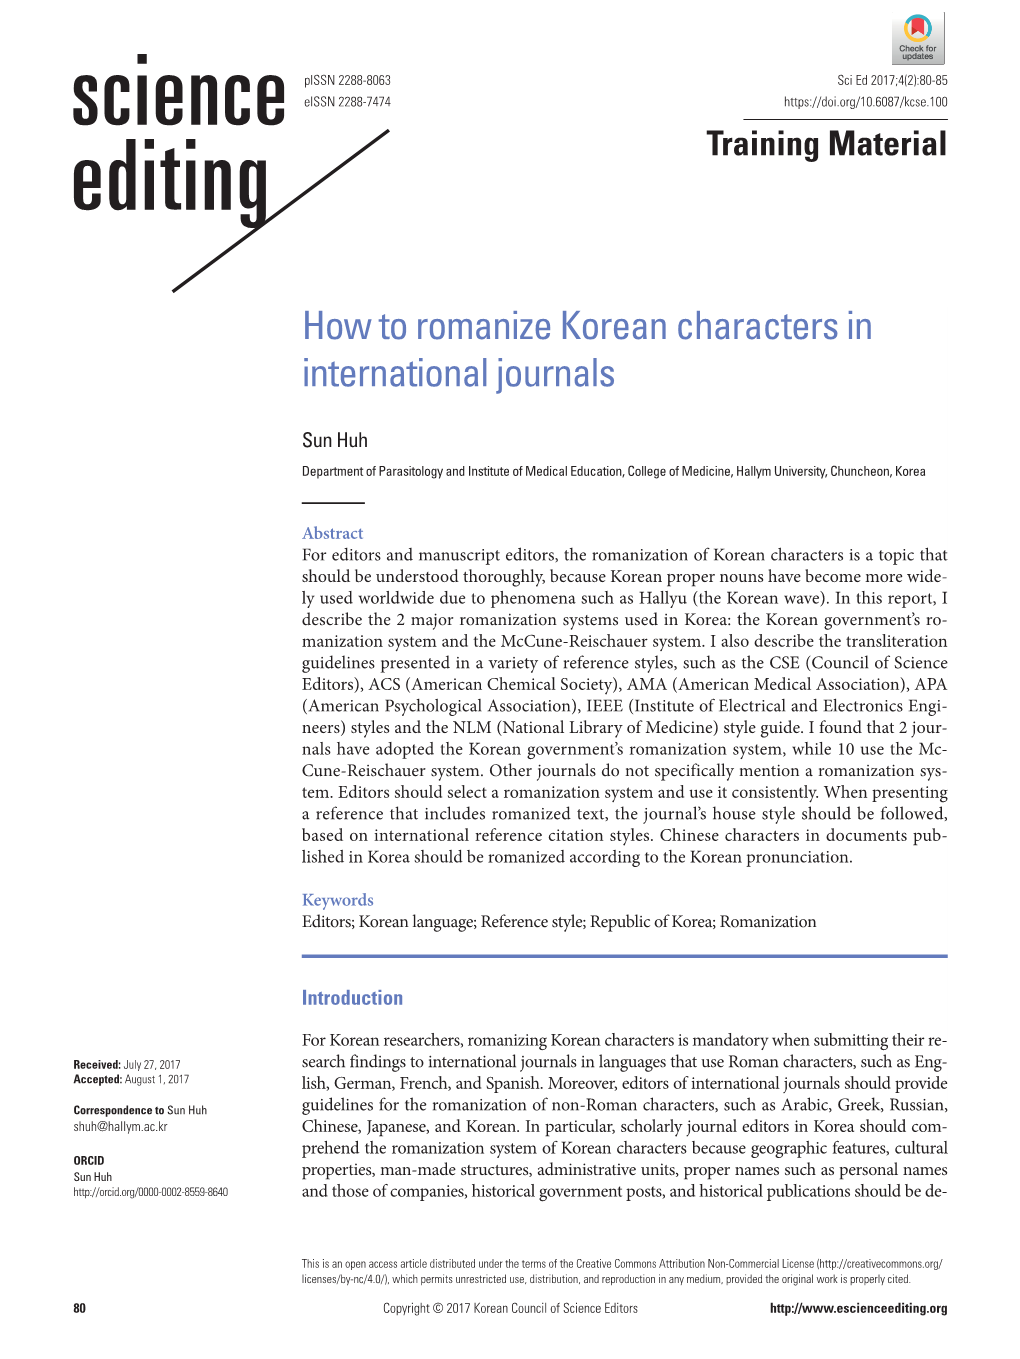 How to Romanize Korean Characters in International Journals